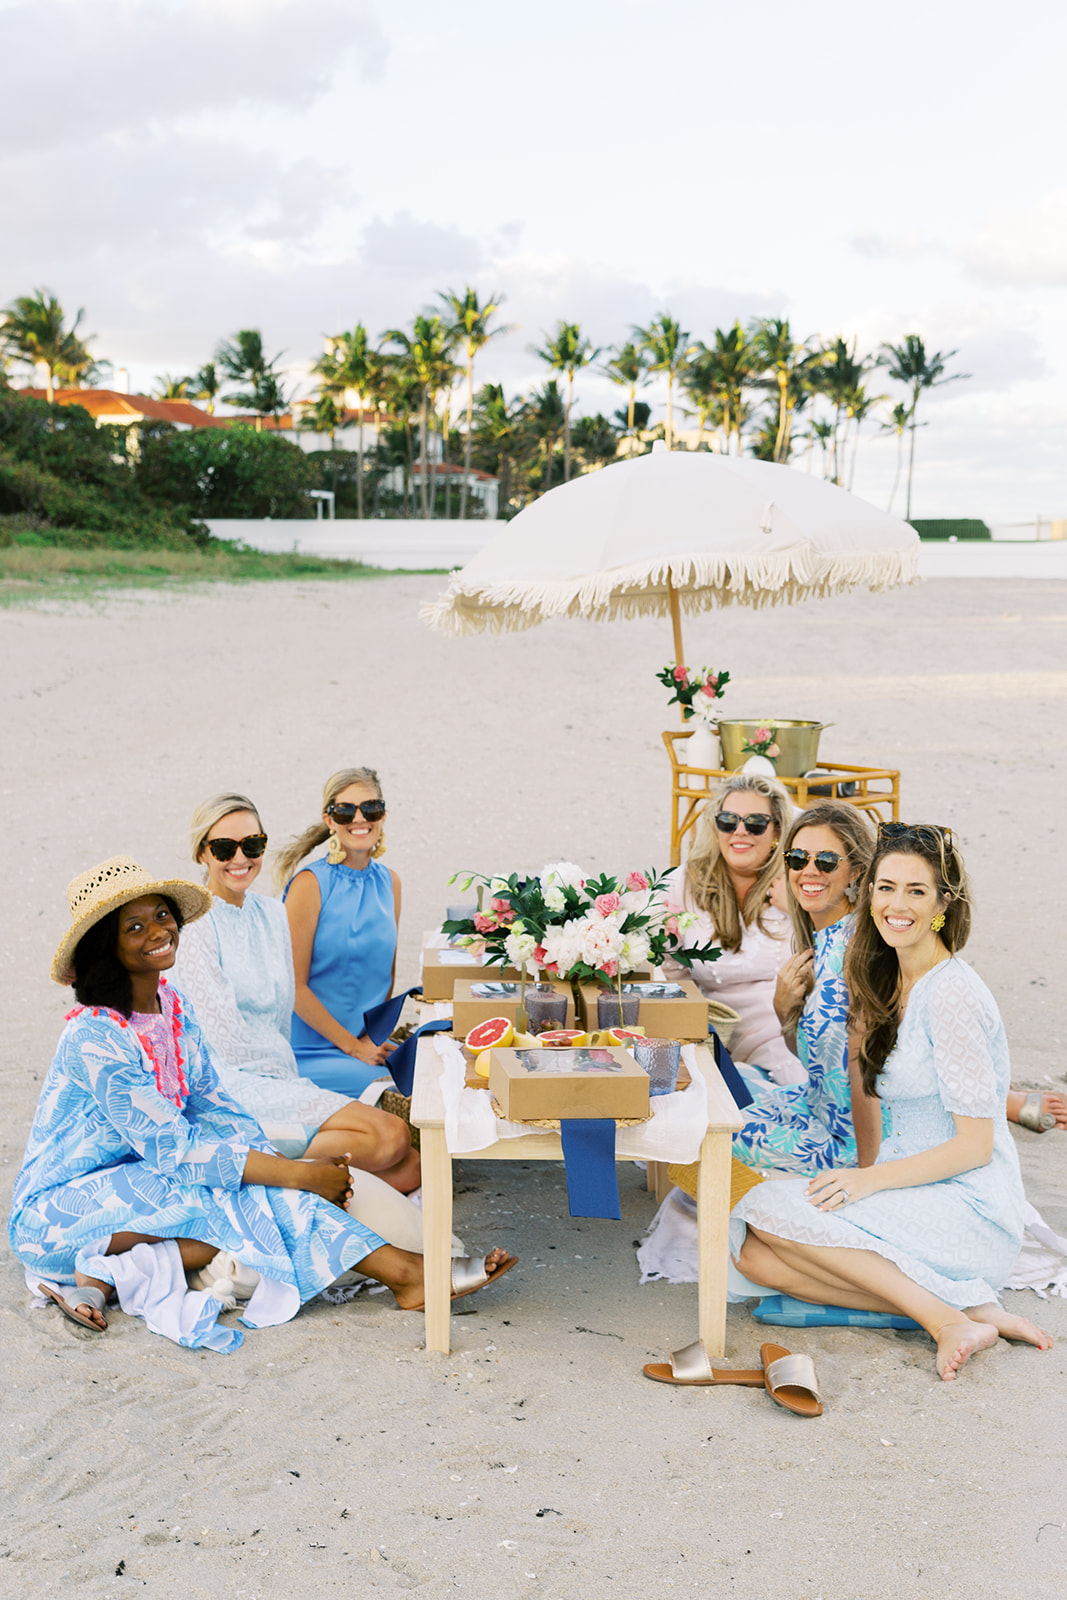 Fashion: Sail to Sable with Palm Beach Lately